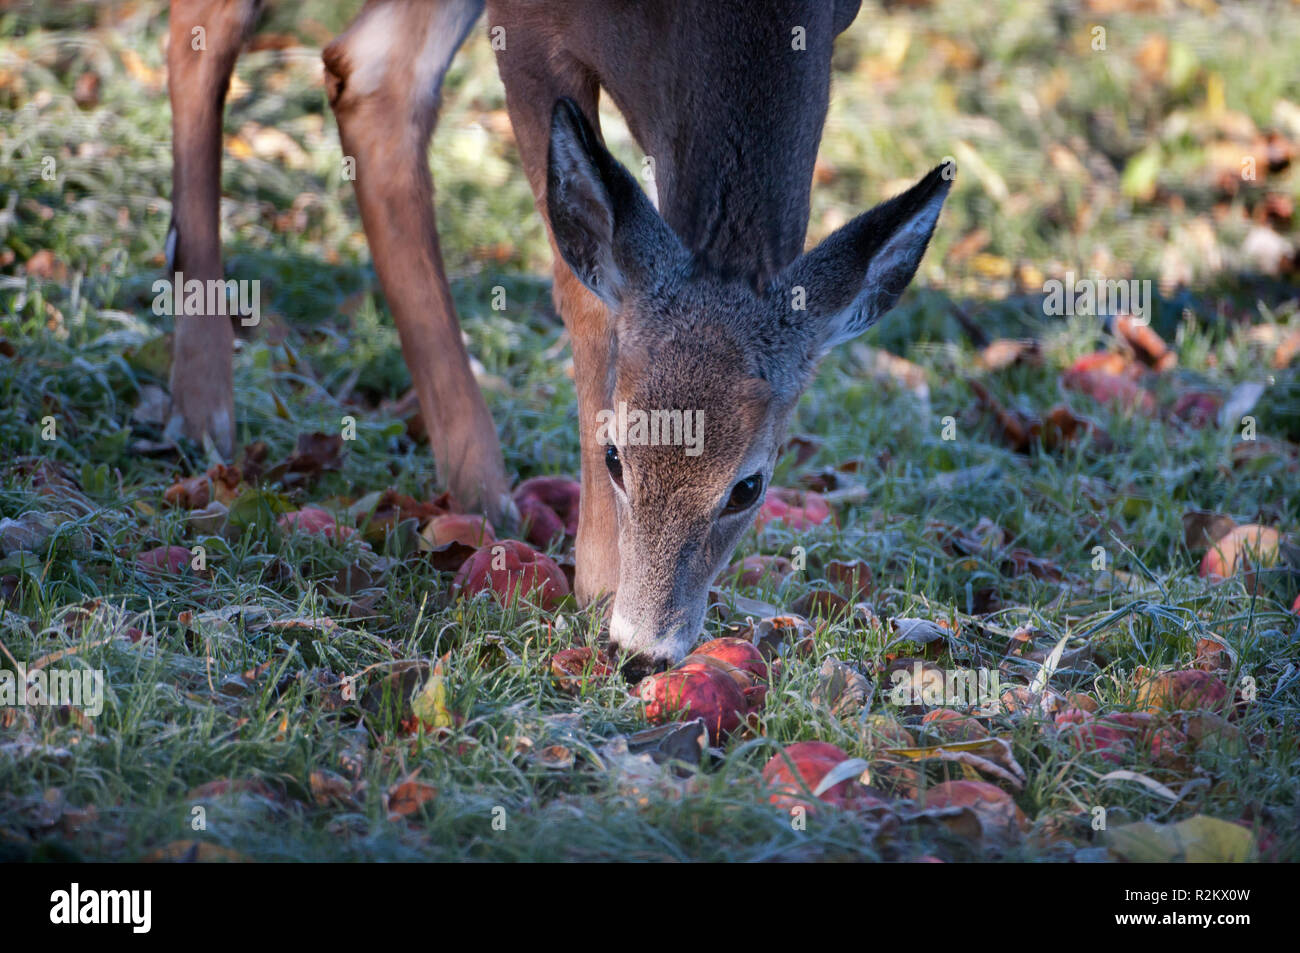 Closeup of a deer eating apples in frosty grass Stock Photo